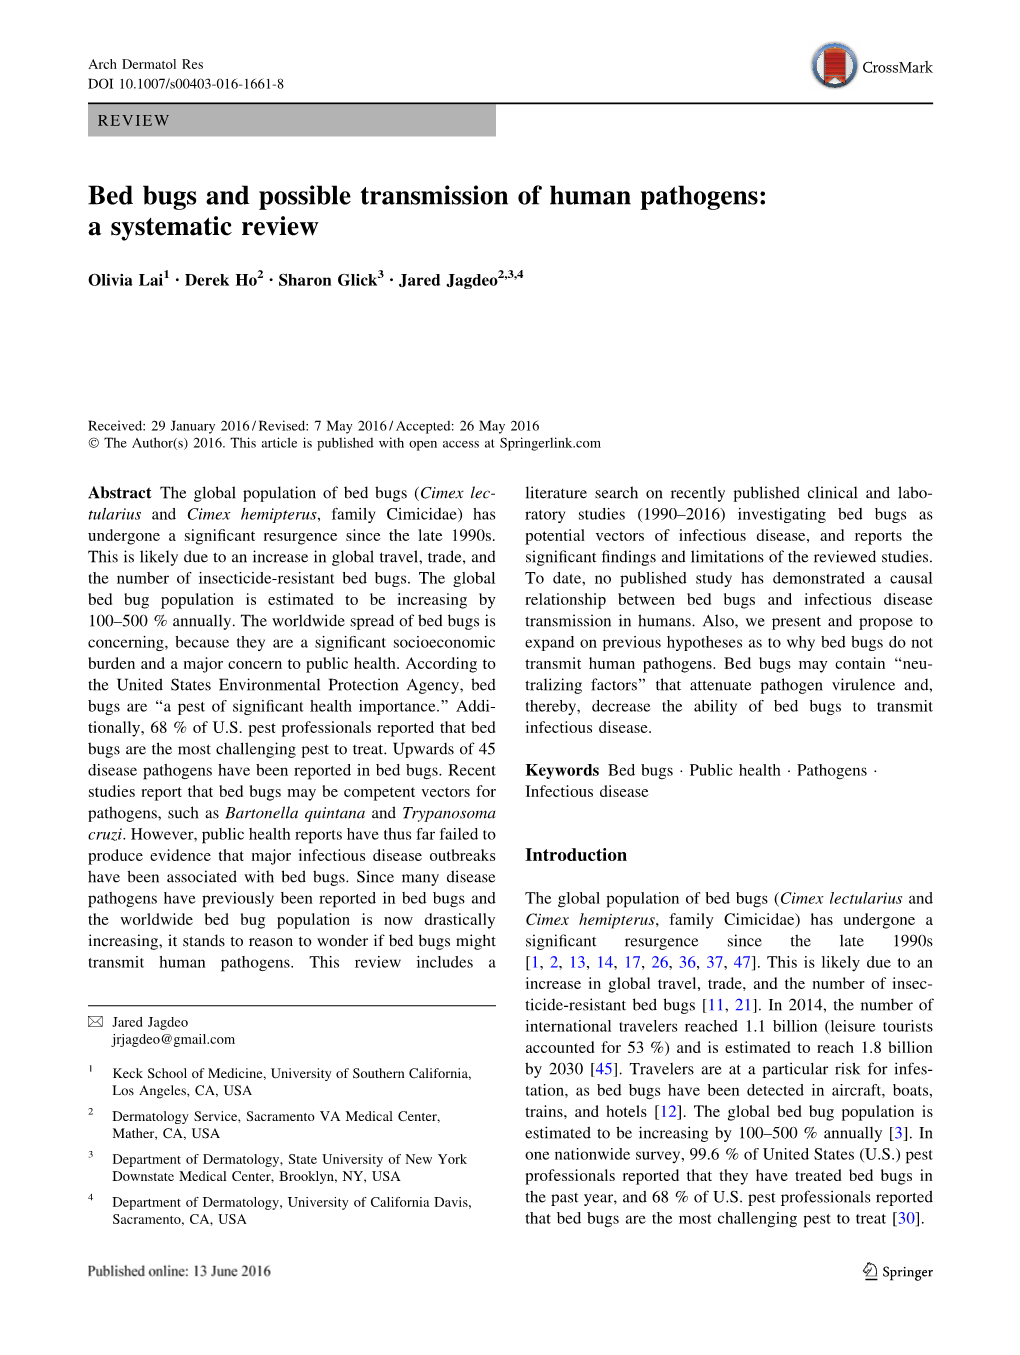 Bed Bugs and Possible Transmission of Human Pathogens: a Systematic Review